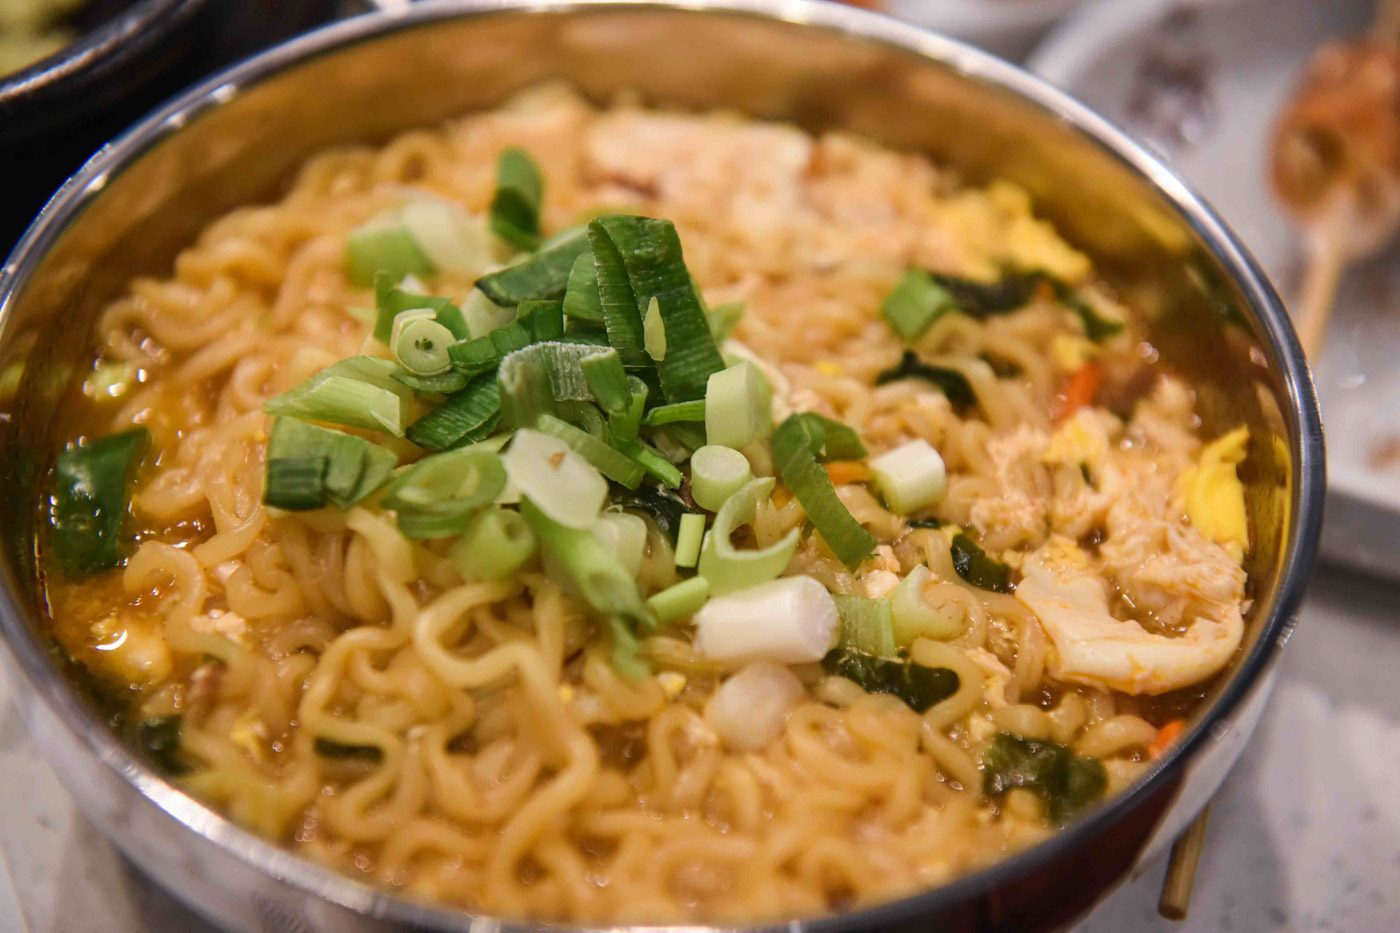 RAMENT TO BE. A serving of Korean Ramen is also on the side dish menu. 